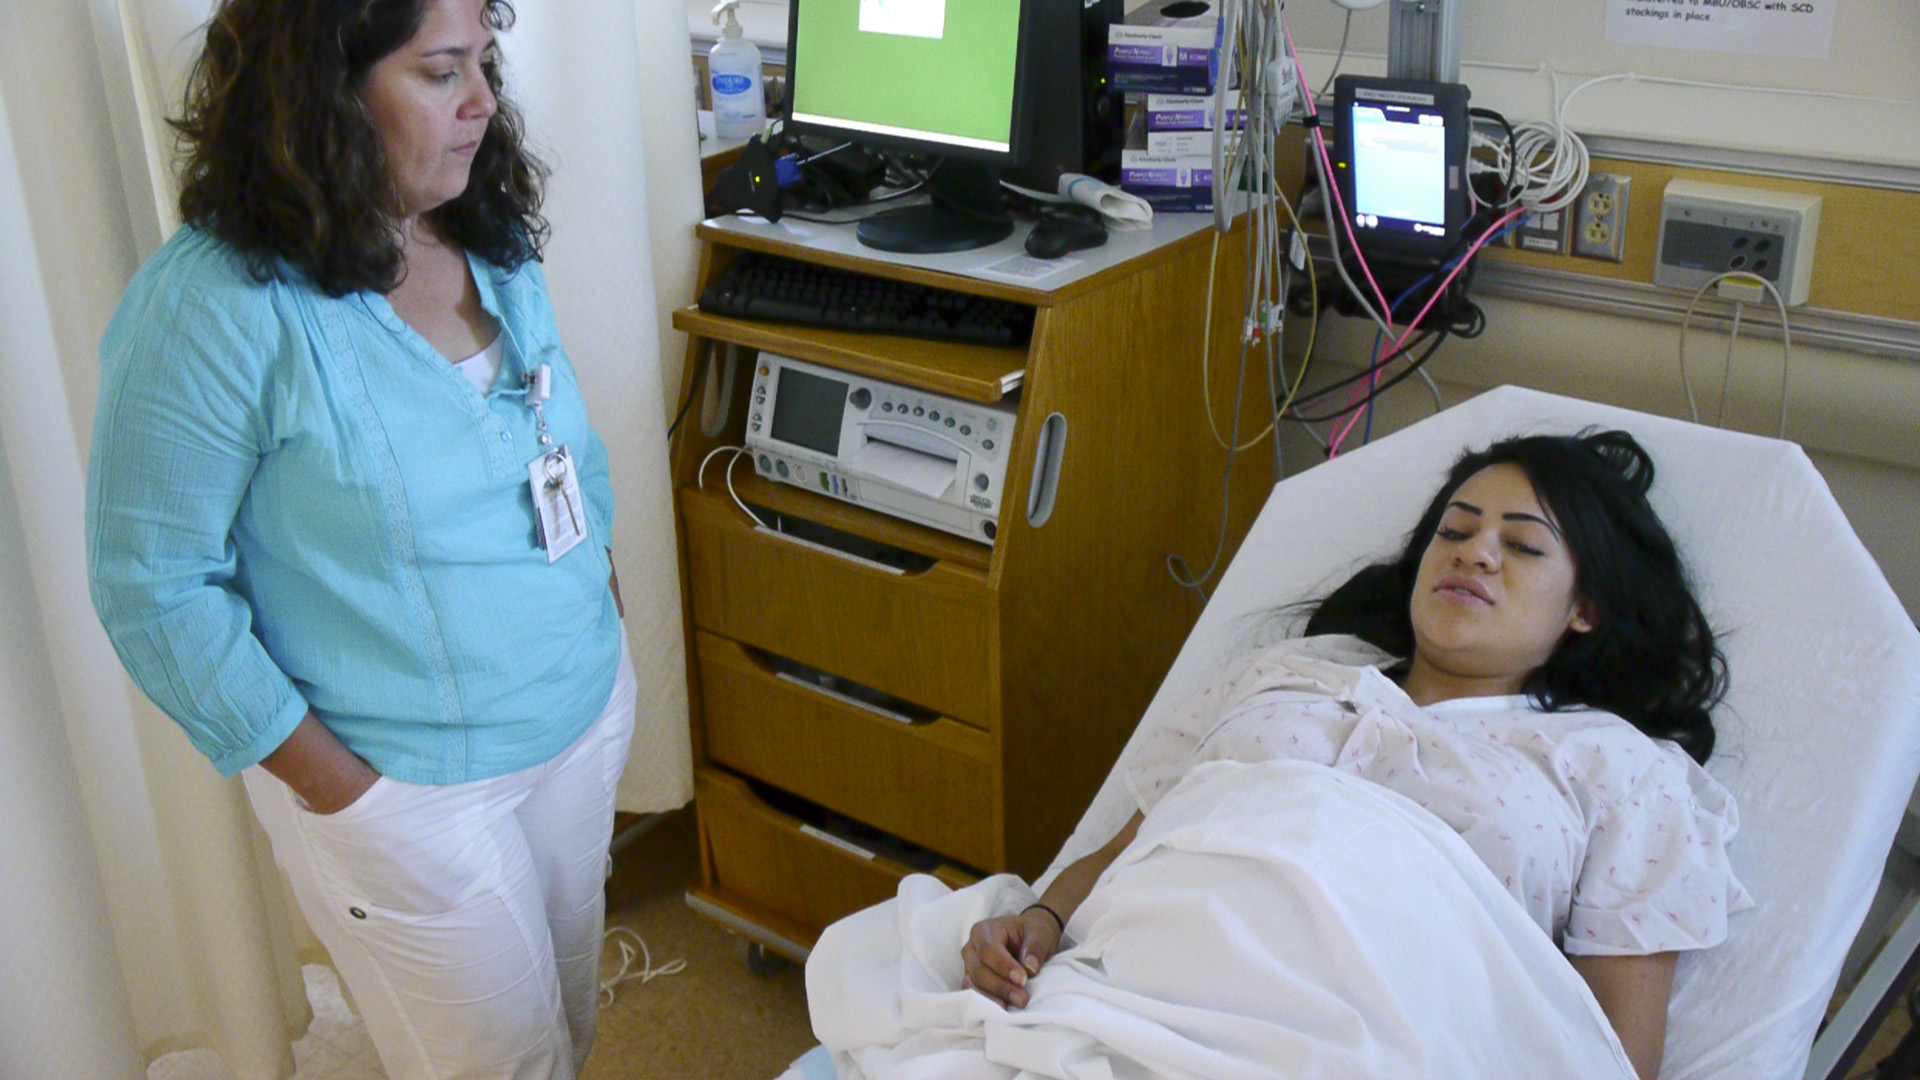 An expected mother laying on a bed with a provider standing next to them